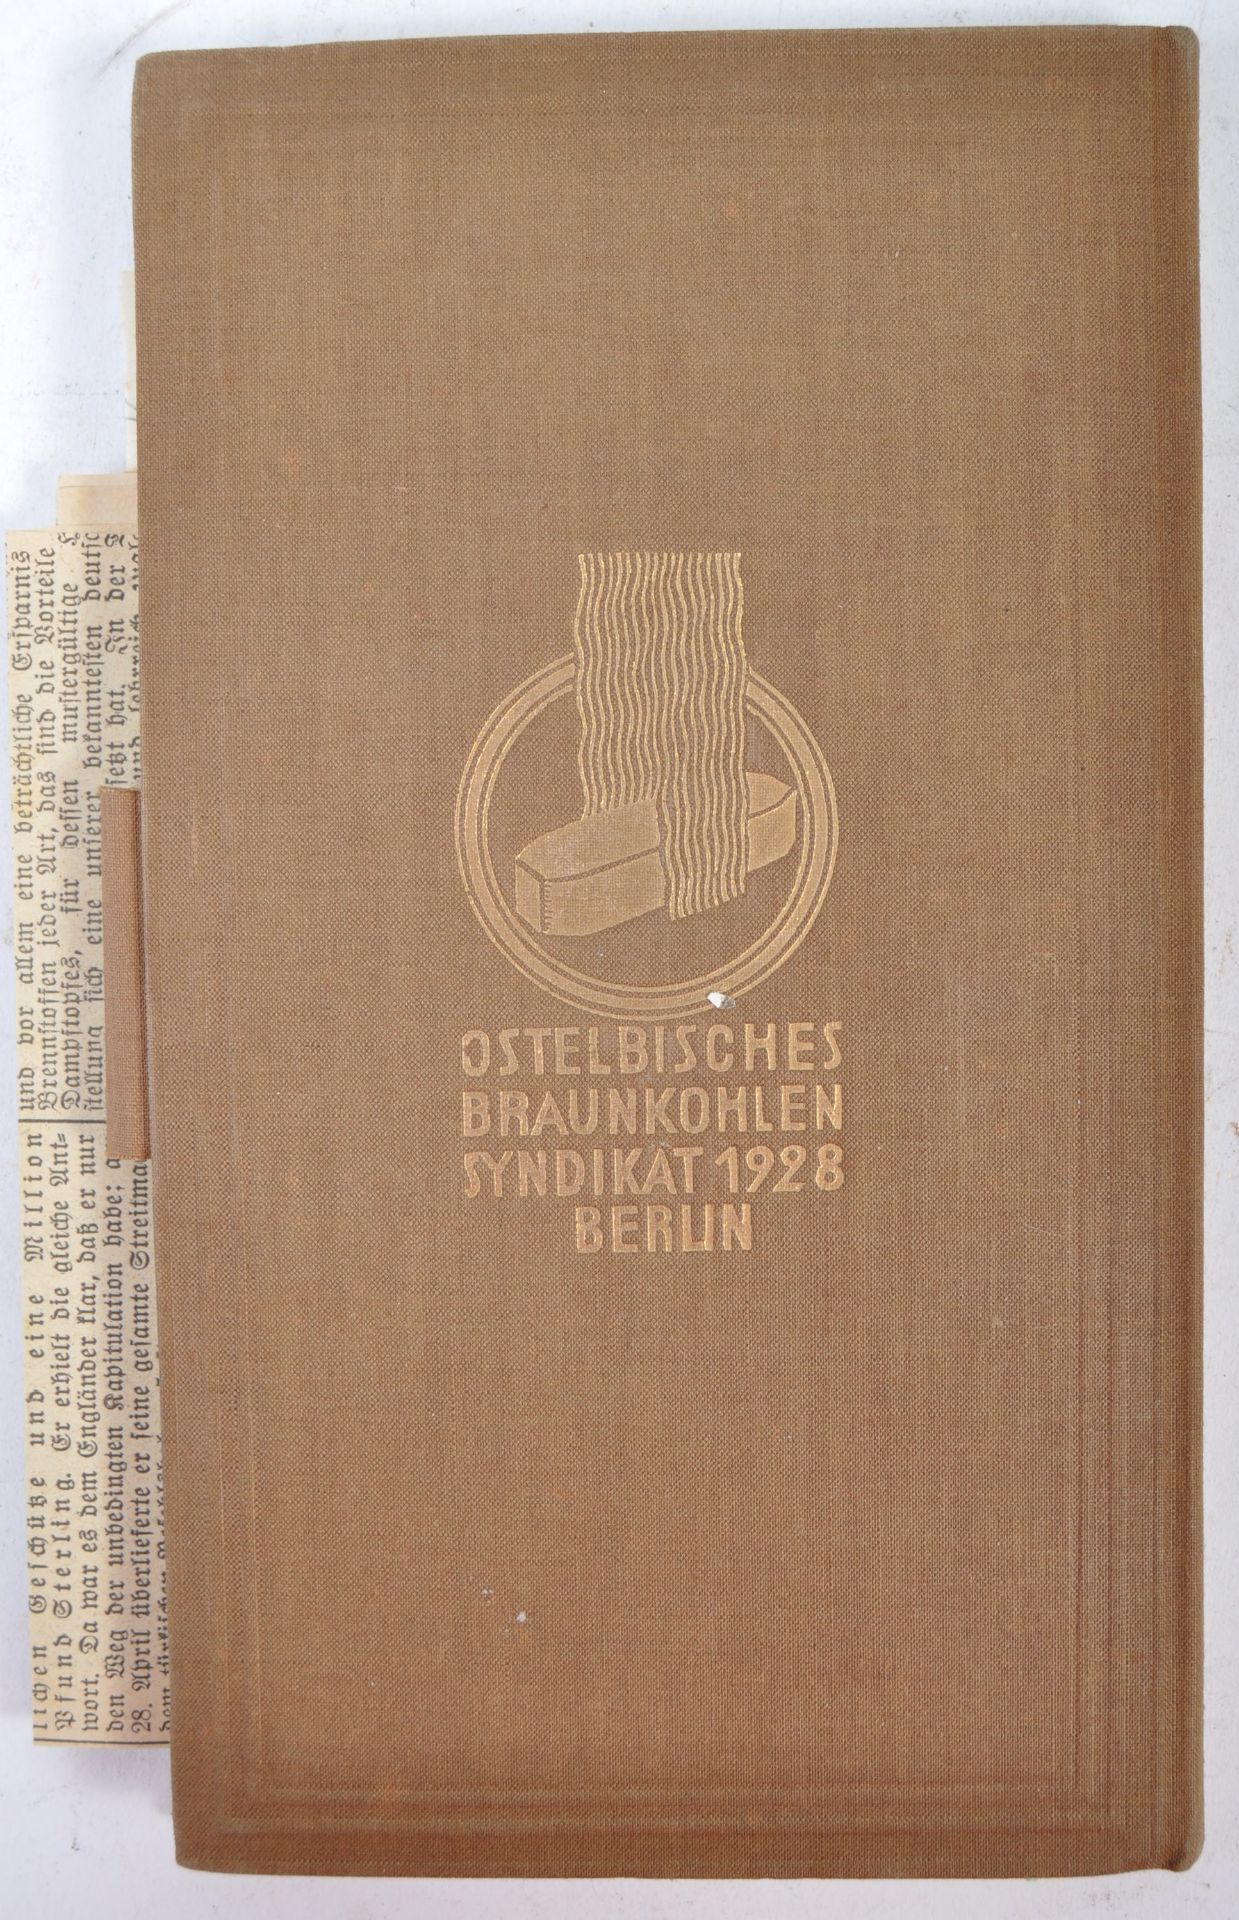 ORIGINAL PRE-WWII GERMAN DIARY FOR 1936 - INCLUDING NEWSPAPER CUTTINGS - Image 6 of 6